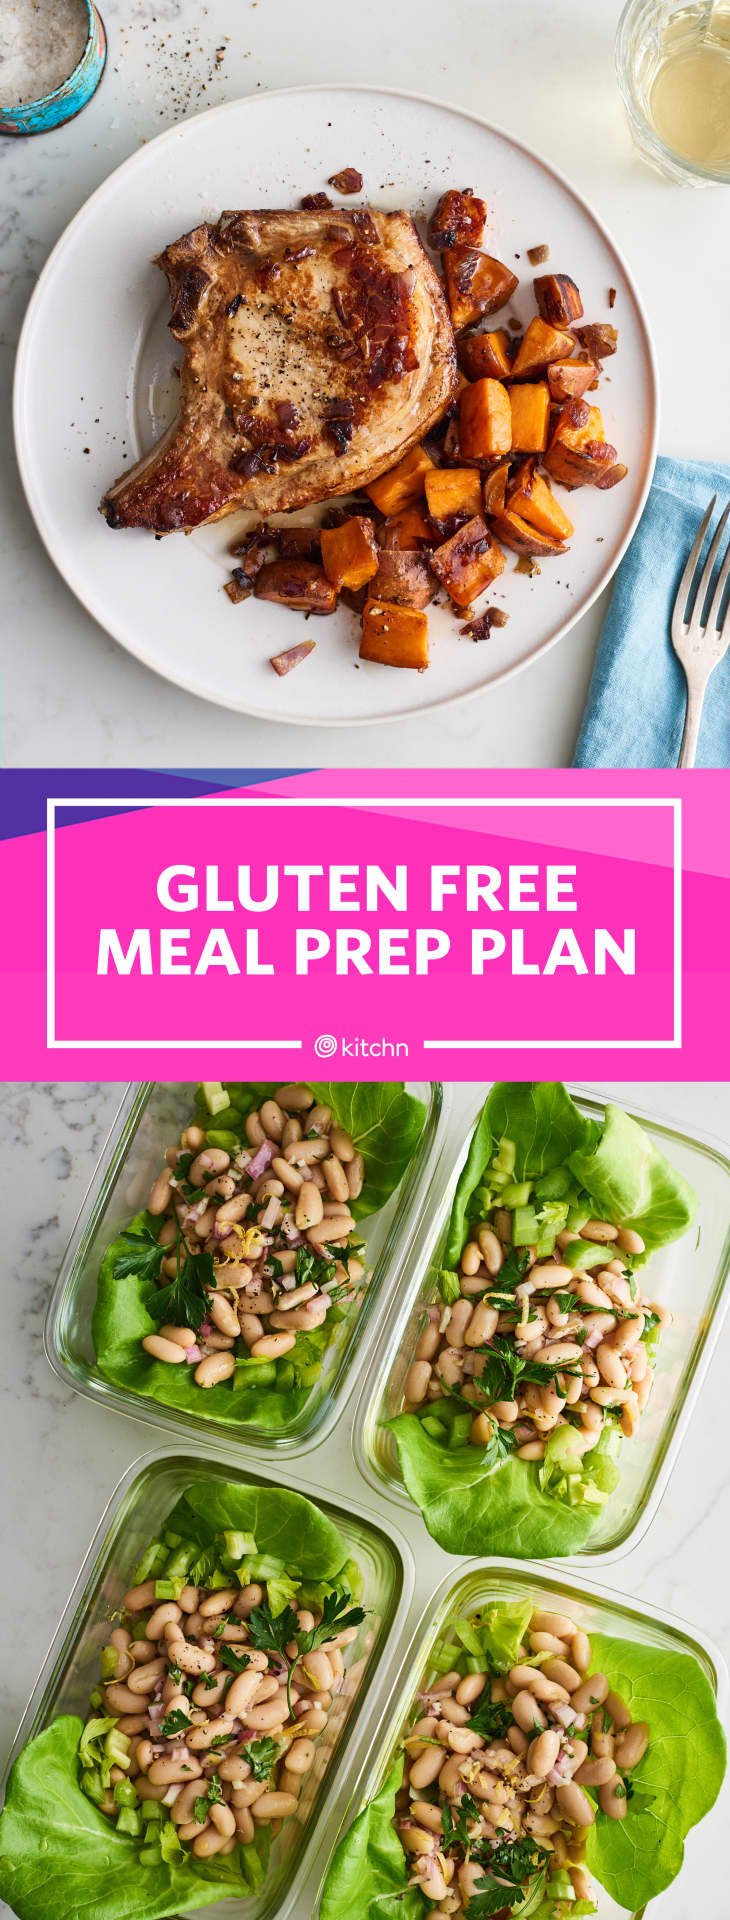 Gluten-Free Meal Prep Plan For Breakfast, Lunch, and Dinner | The Kitchn